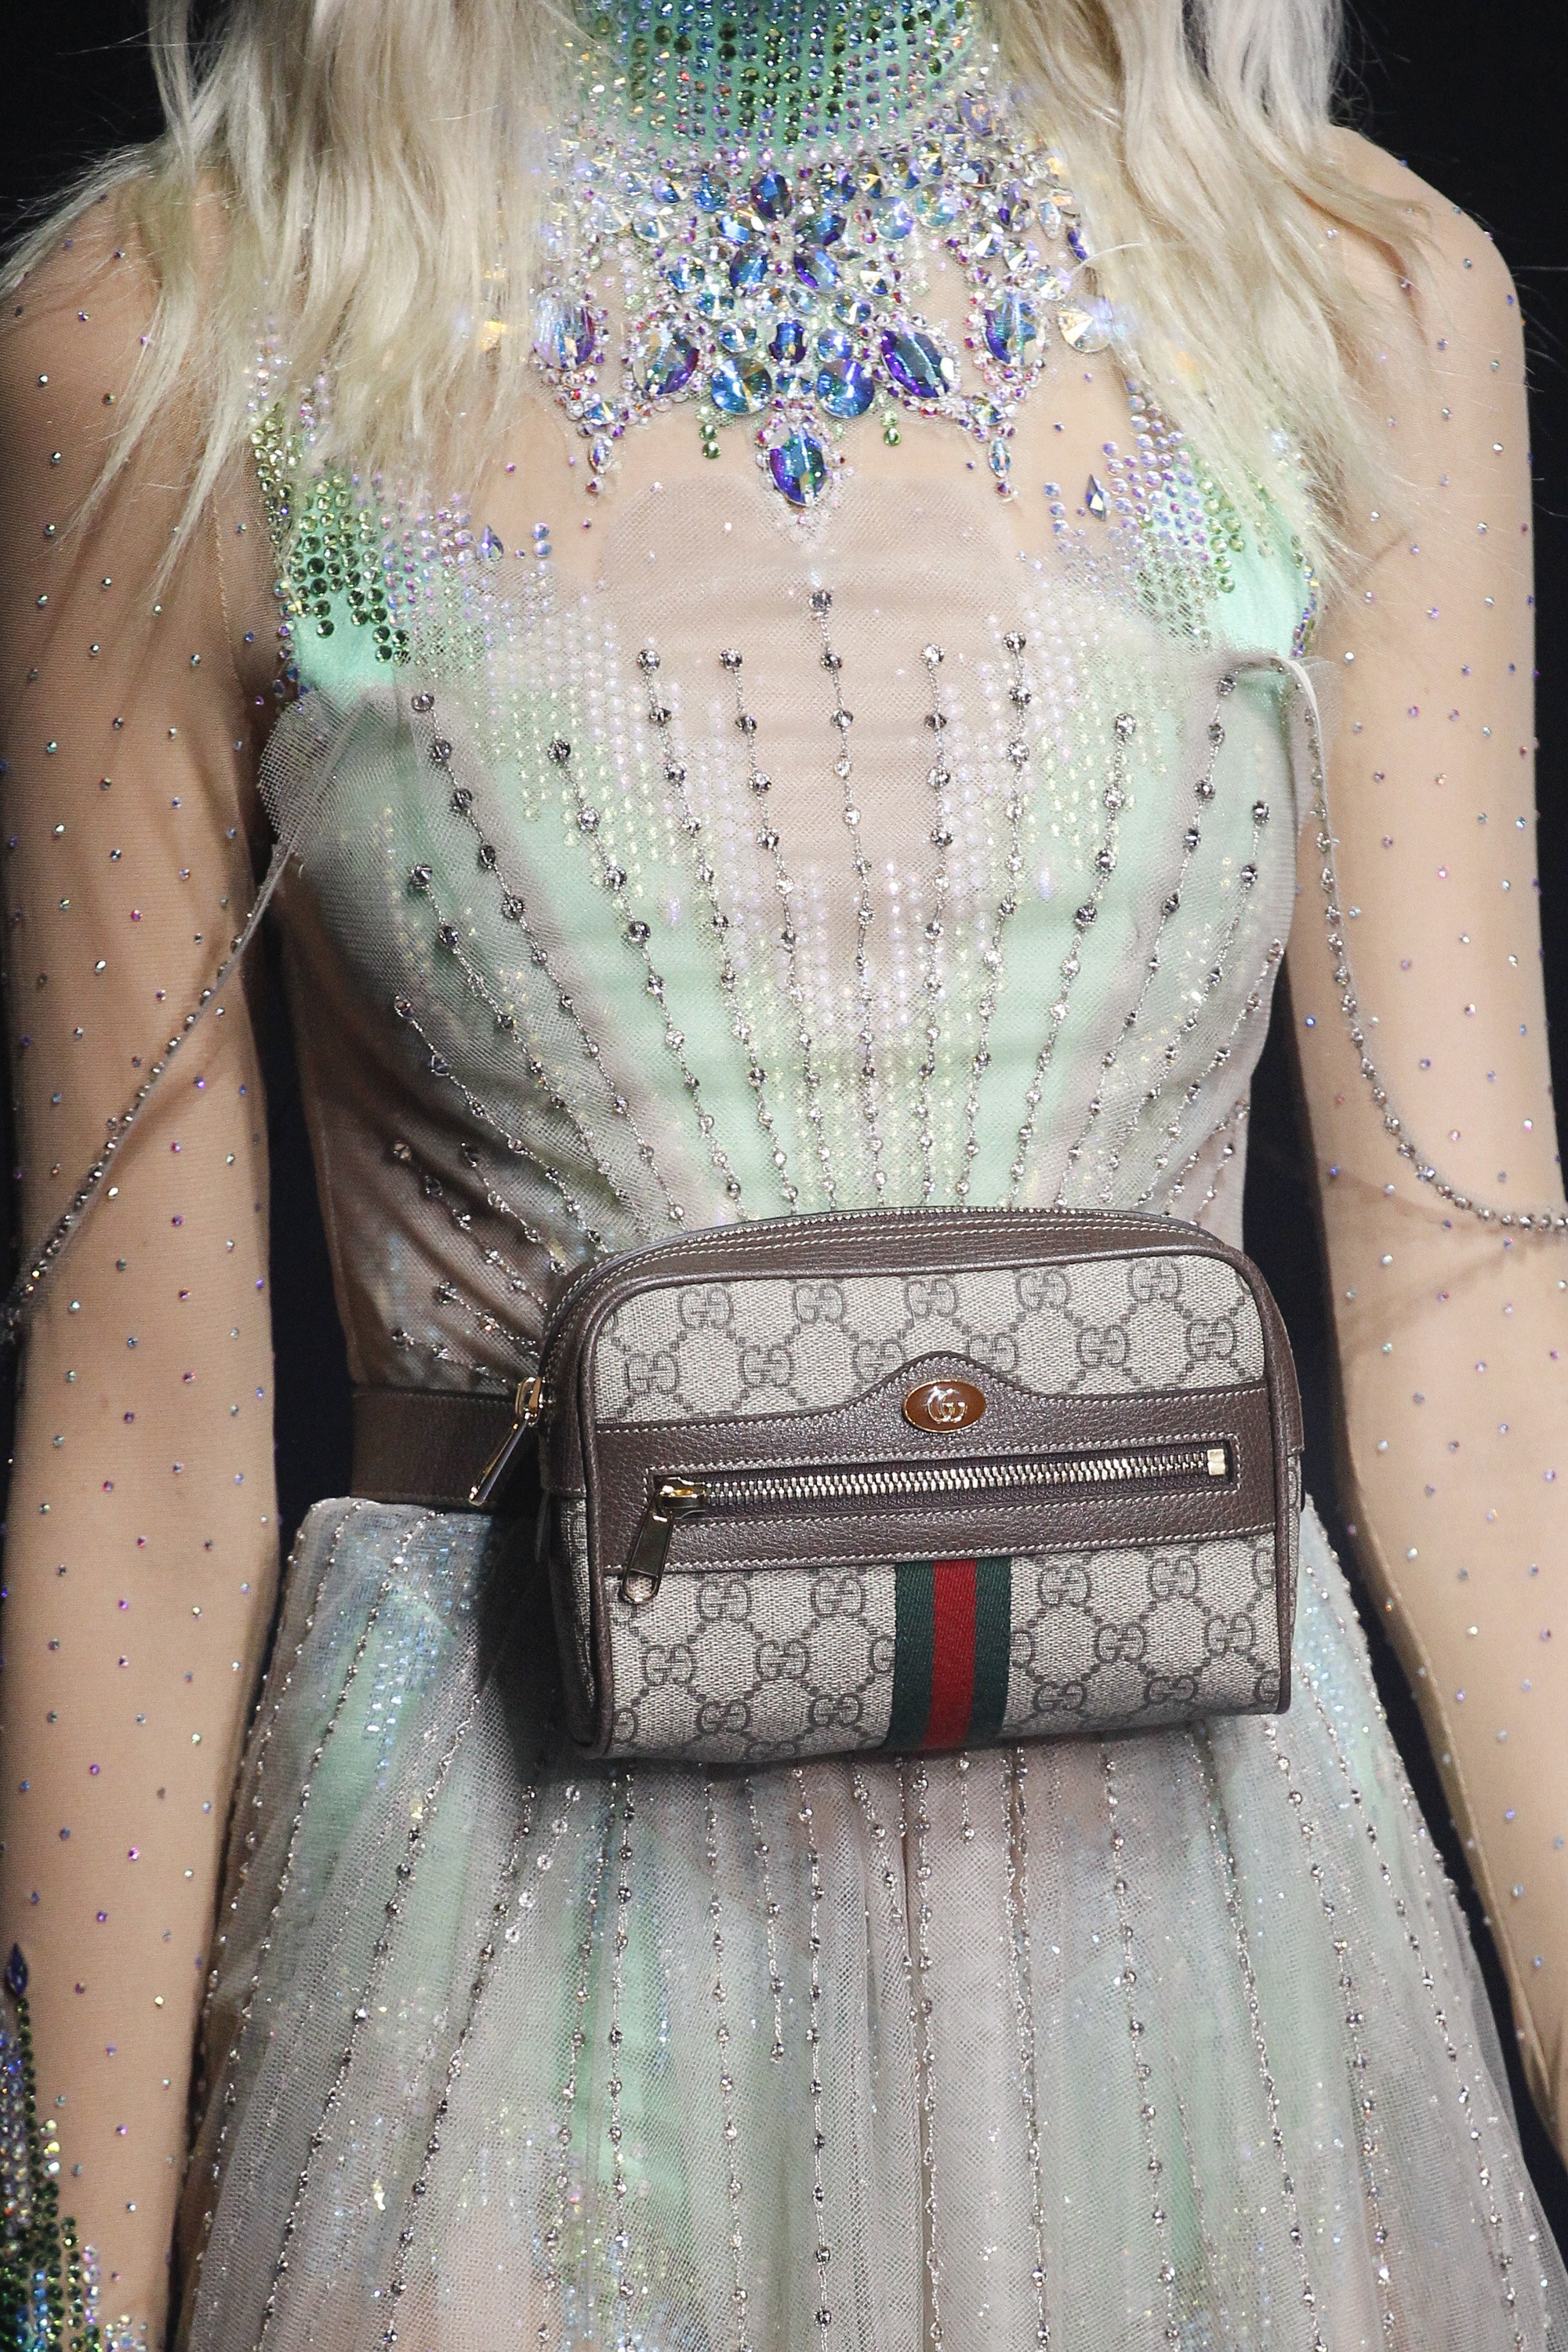 Gucci Spring/Summer 2018 Runway Bag Collection | Spotted Fashion2000 x 3000